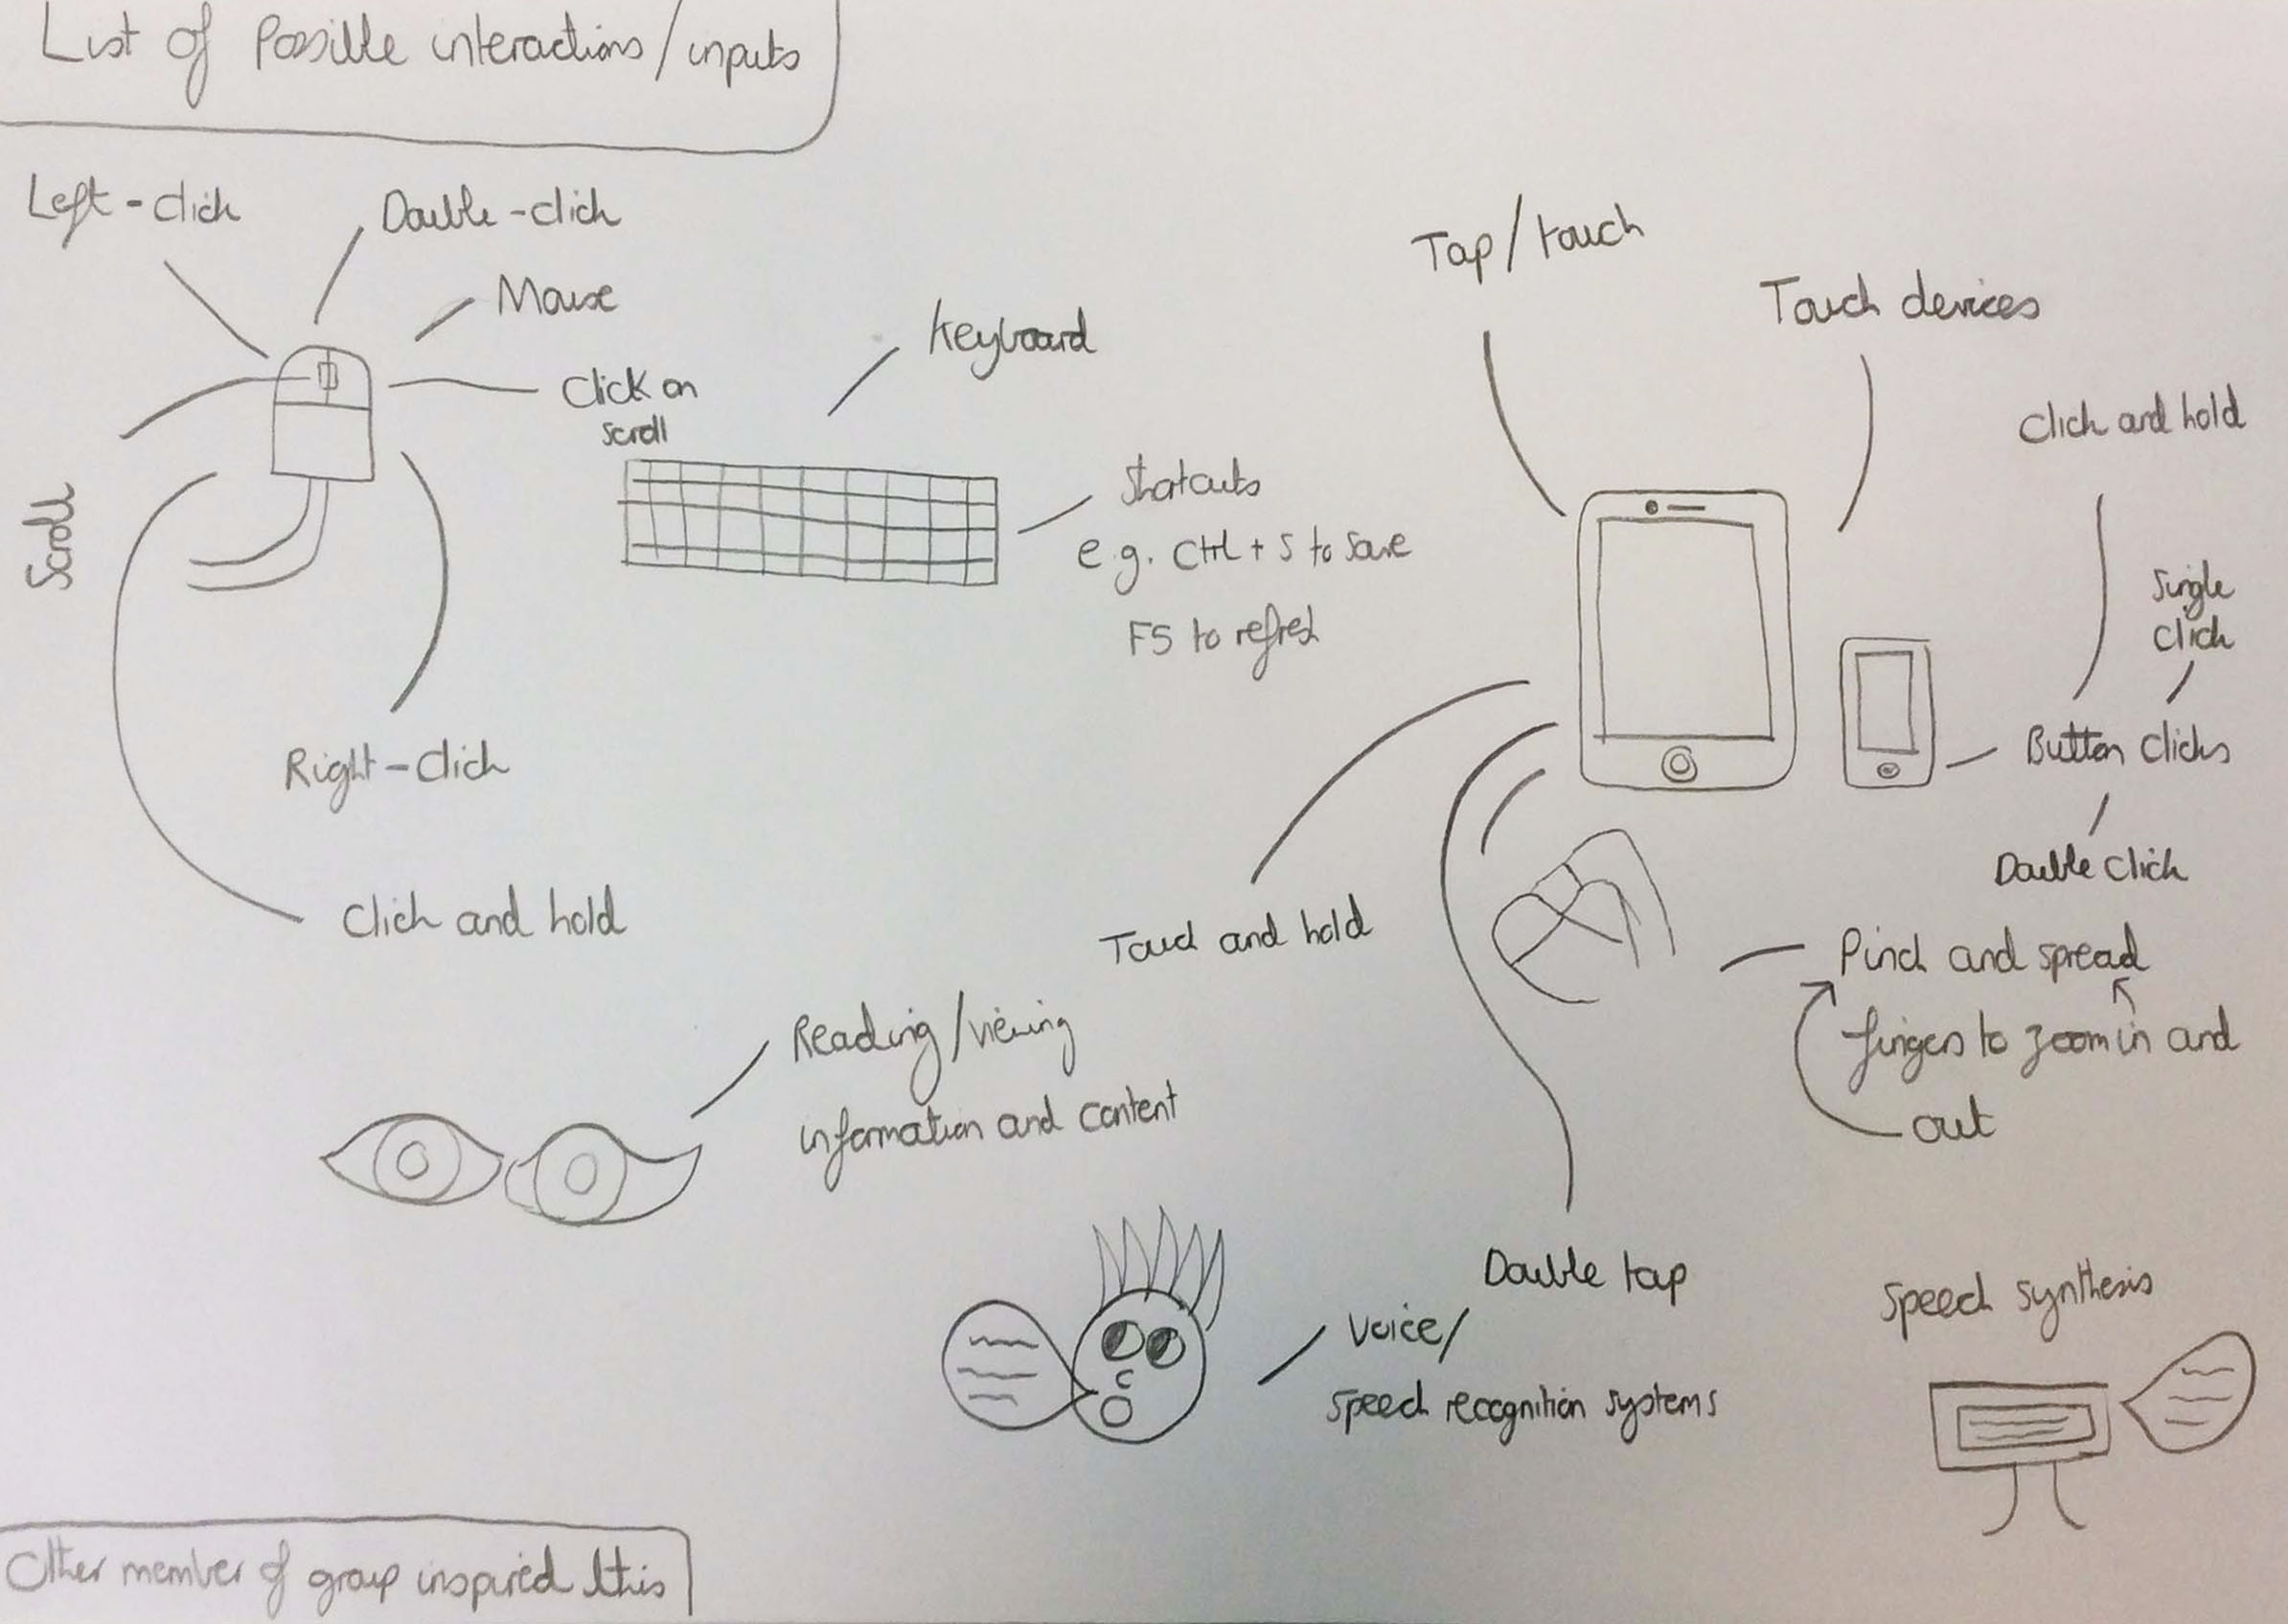 The Sketches of Possible User Interactions